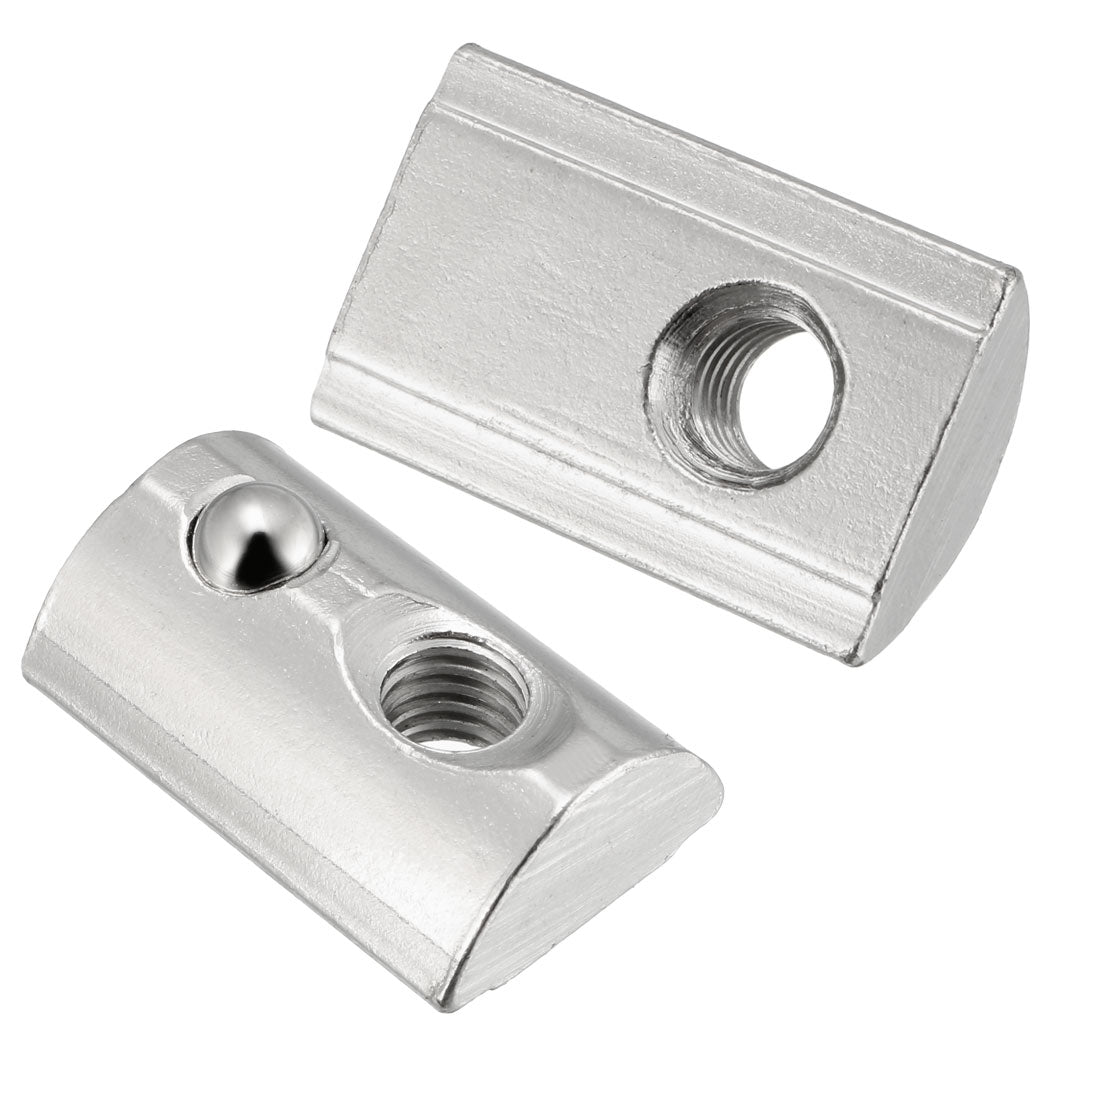 Uxcell Uxcell Roll-In Spring M8 T Nut 4545 Series Aluminum Extrusion, for 9.8mm T Slot 12 Pcs